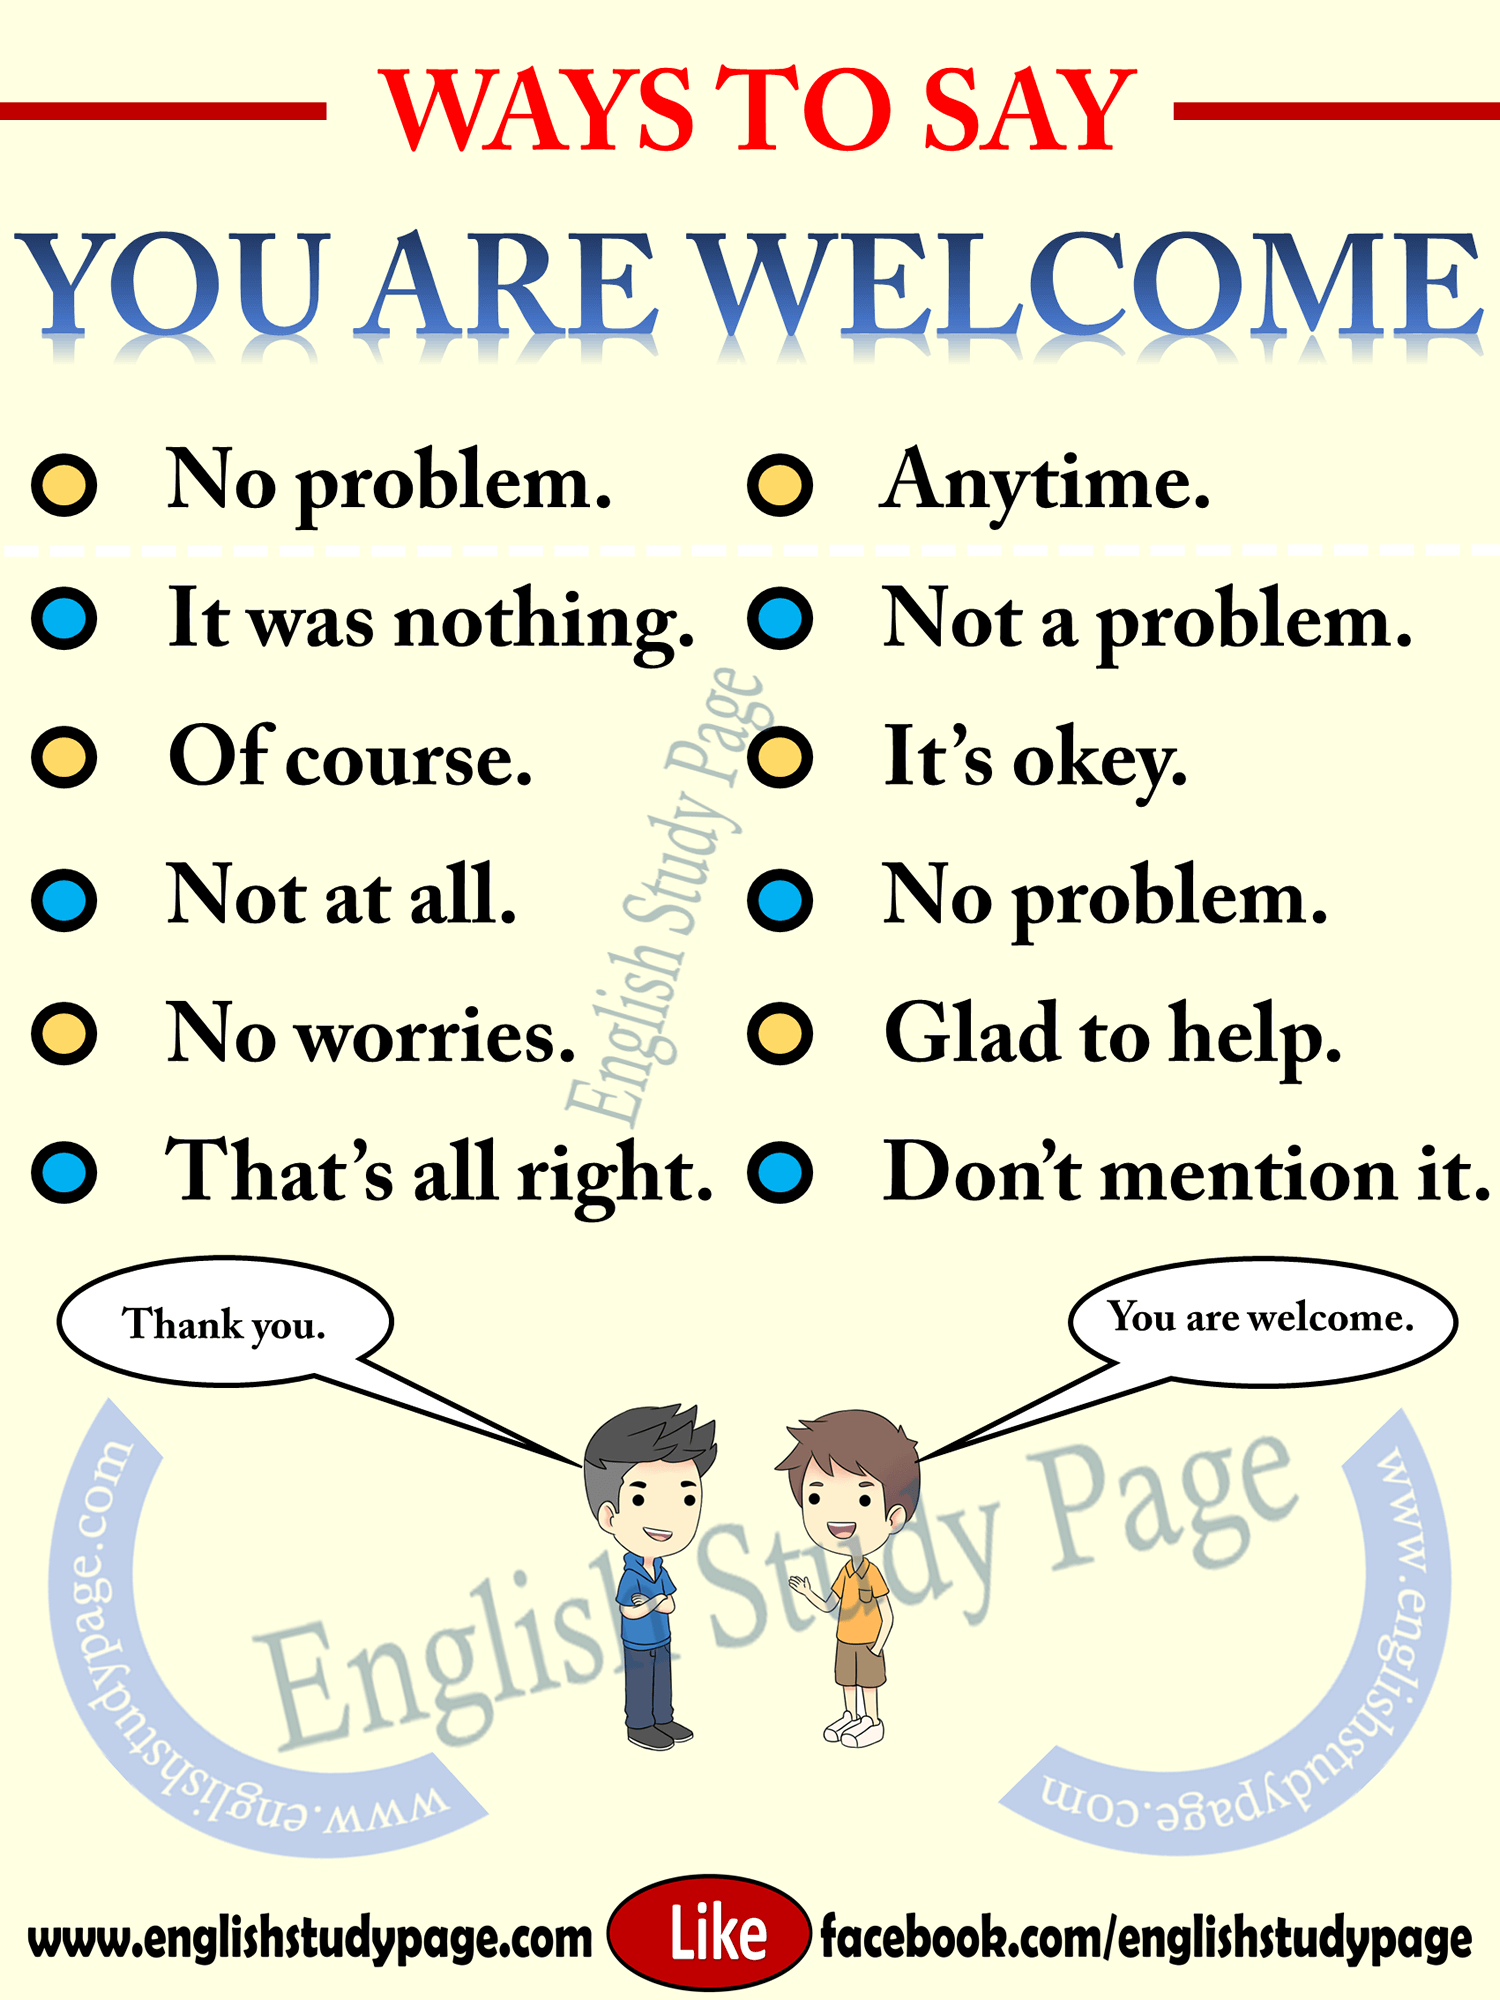 Other Ways To Say “You are Welcome”